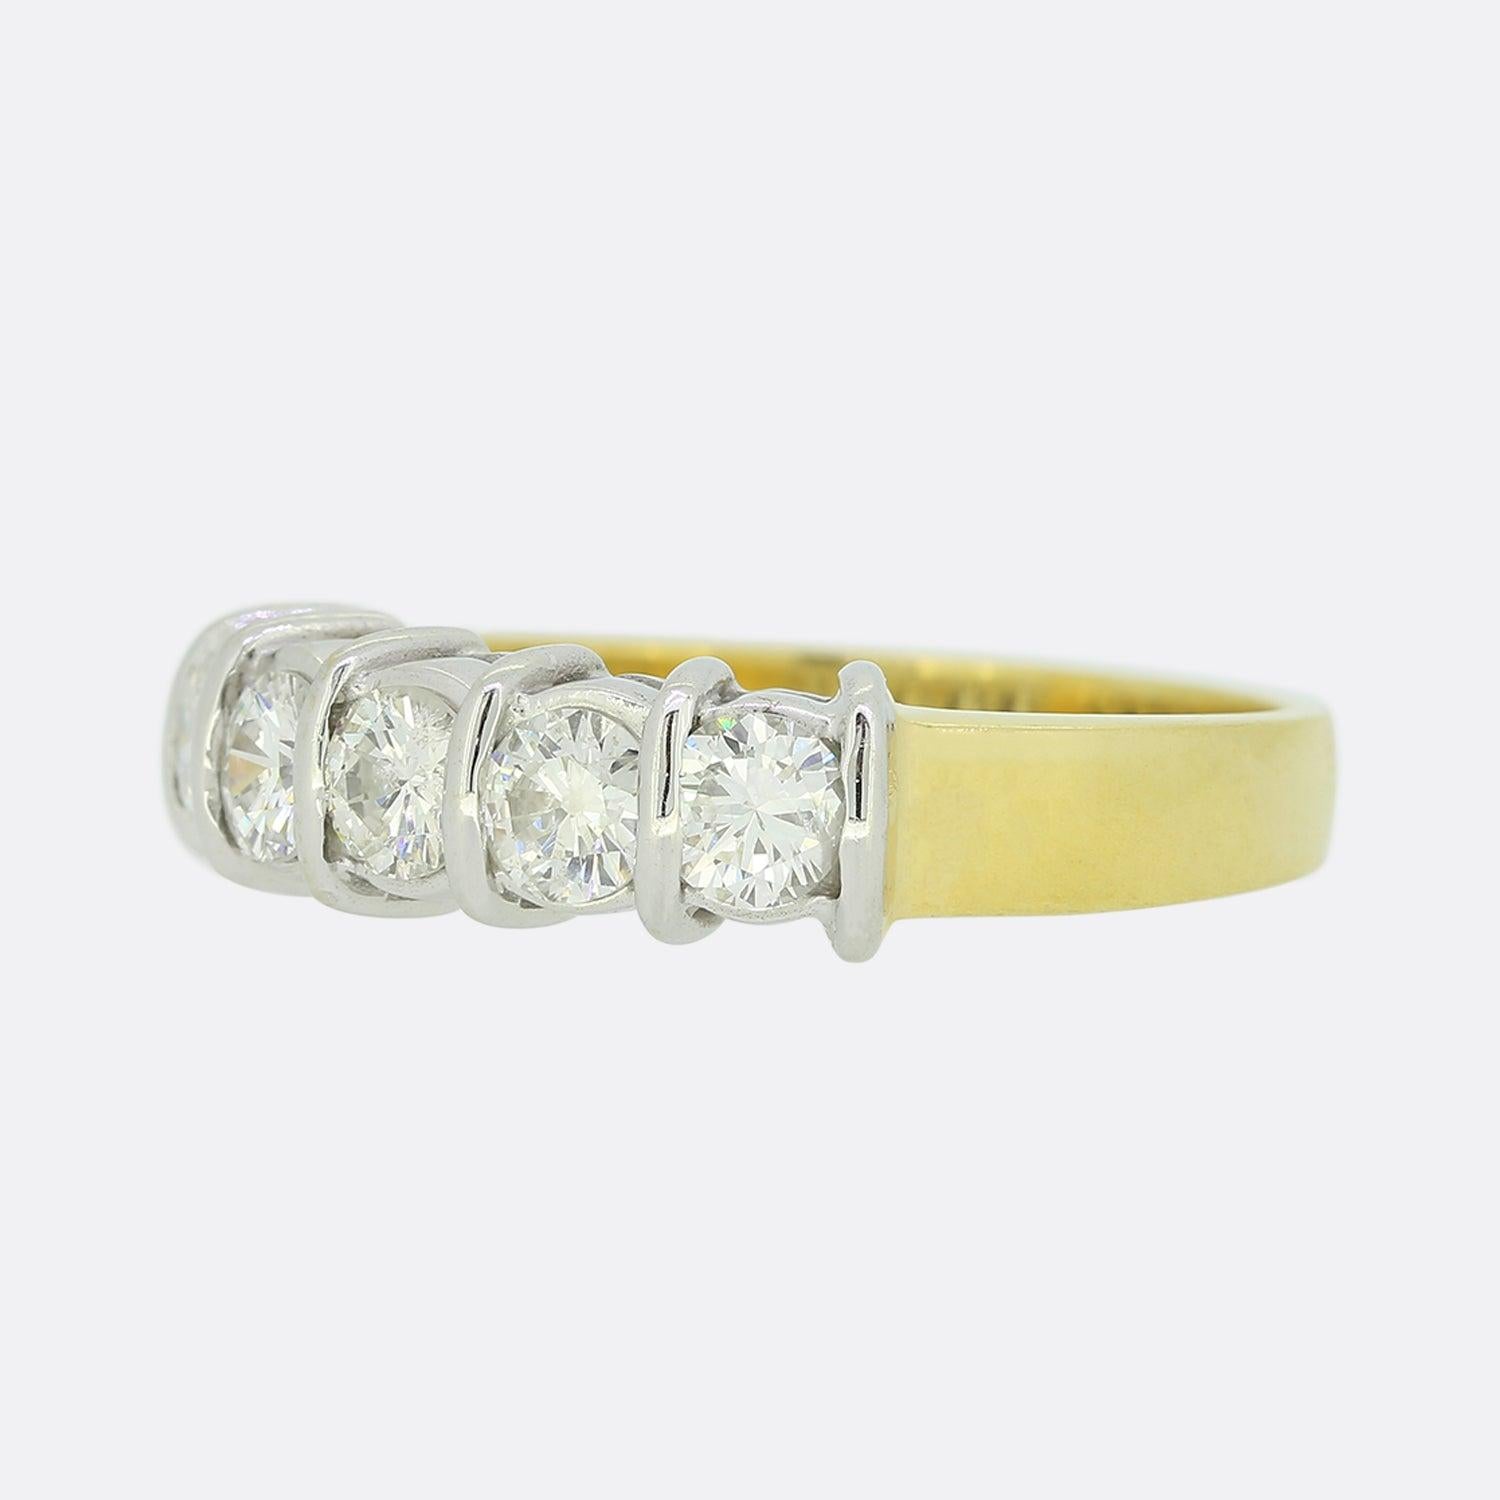 This is a vintage 18ct yellow gold diamond five stone ring. The diamonds are well matched for colour and clarity and sit in bar settings. Although the band of the ring is 18ct yellow gold the diamonds sit in white gold to emphasise their lovely